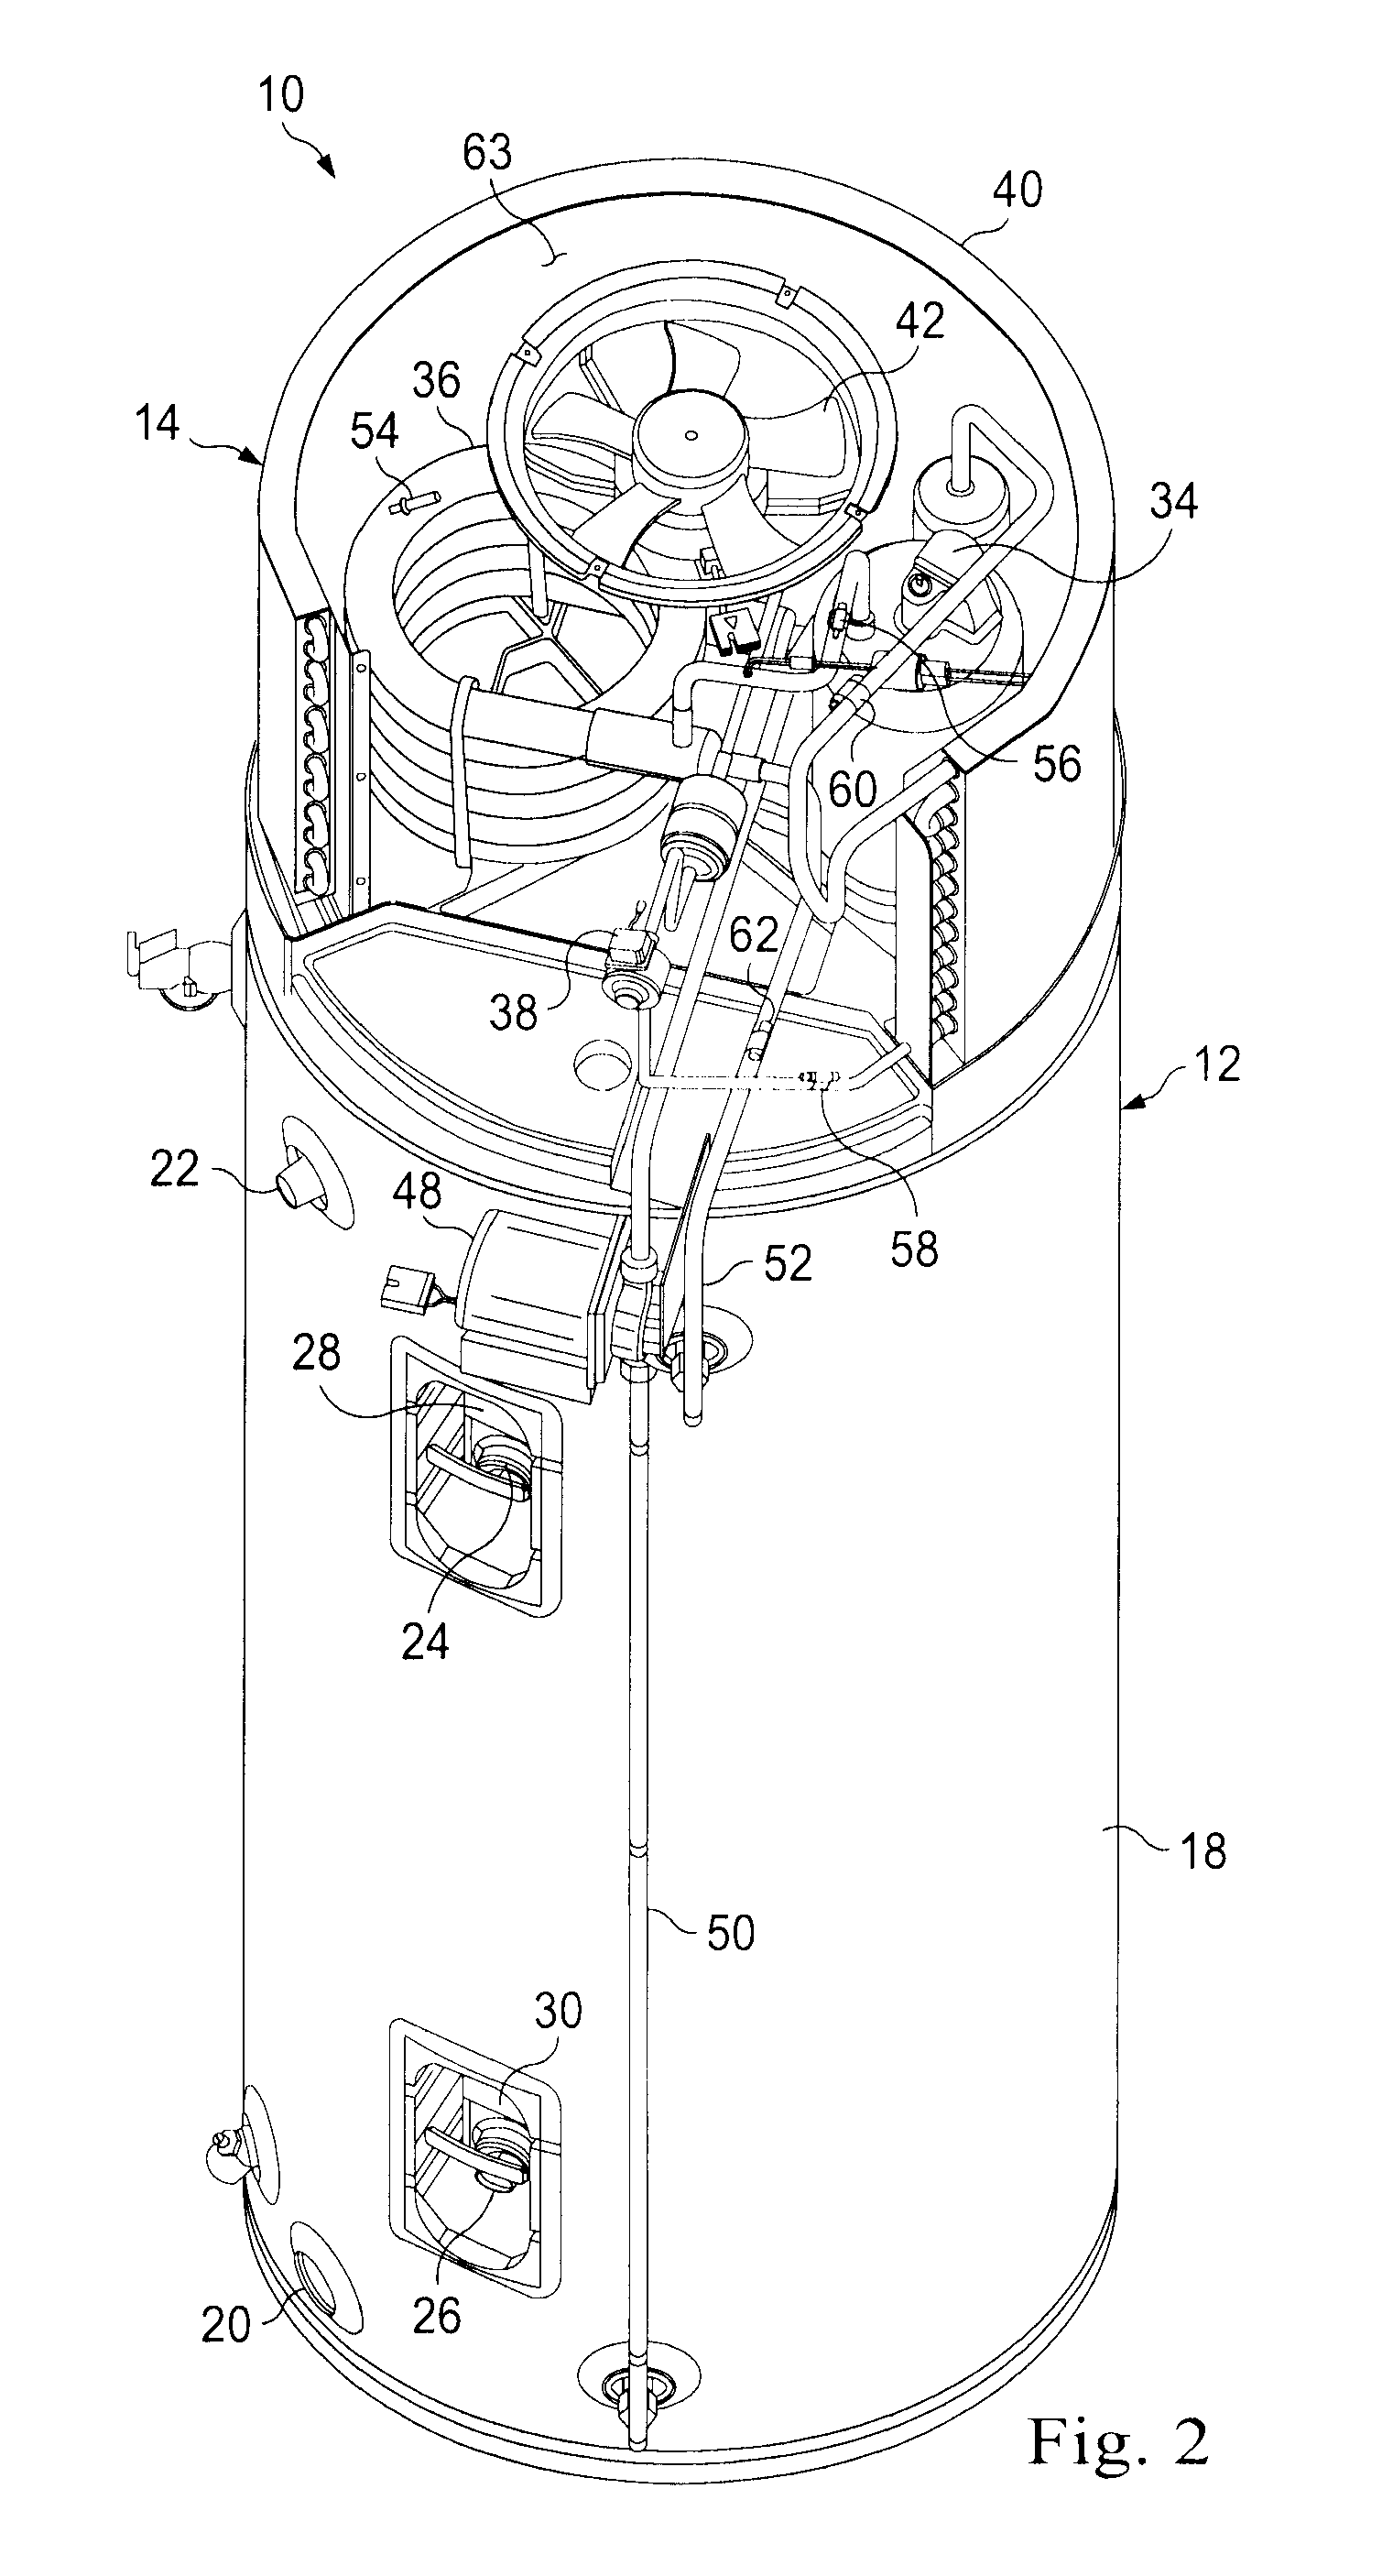 Heat pump water heater and associated control system